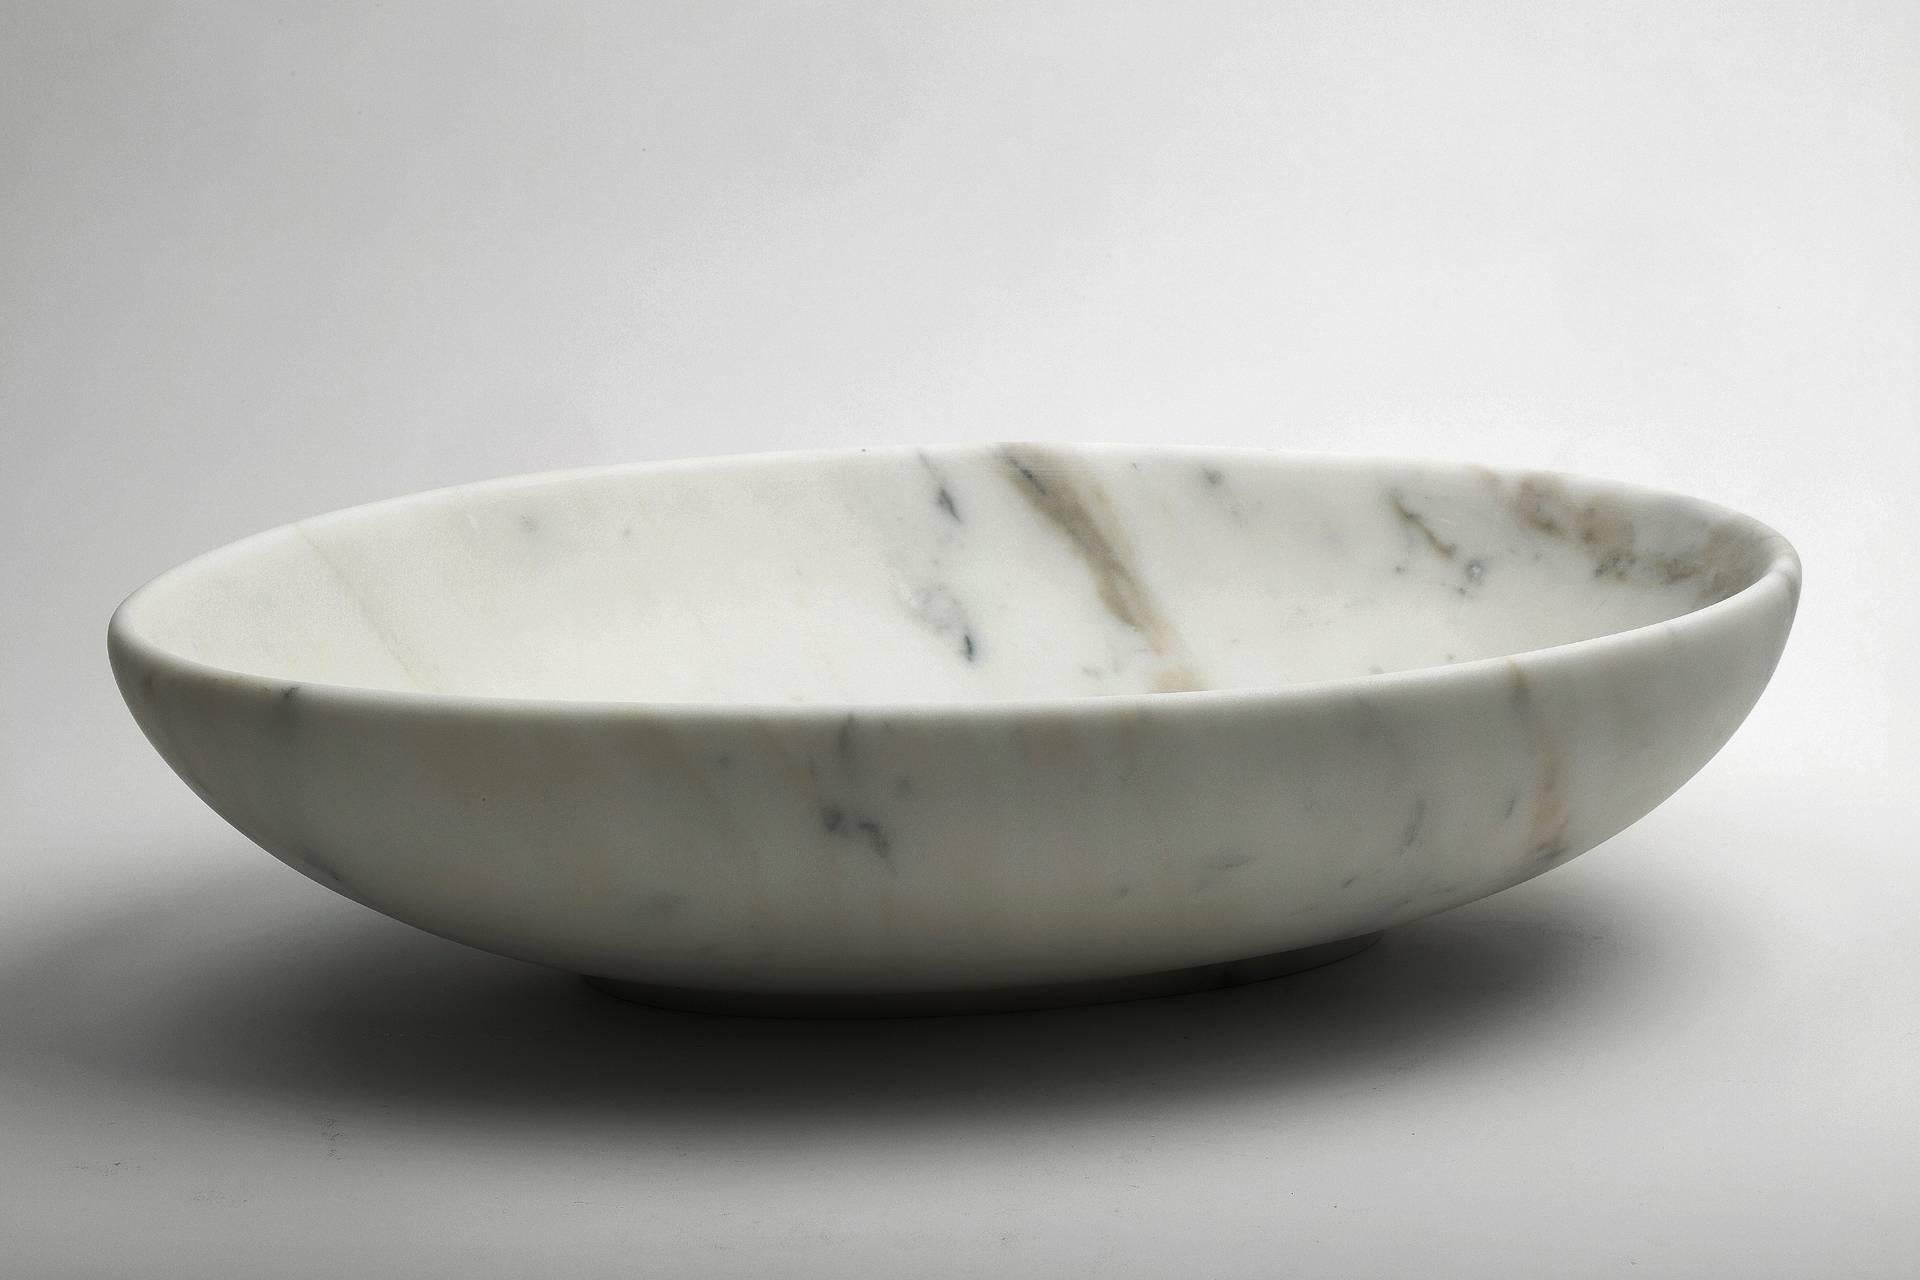 Big oval bowl in white Carrara marble. Each piece is in a way unique (since each marble block is different in veins and shades) and handmade by Italian artisans specialized over generations in processing the famous Carrara marble. Slight variations